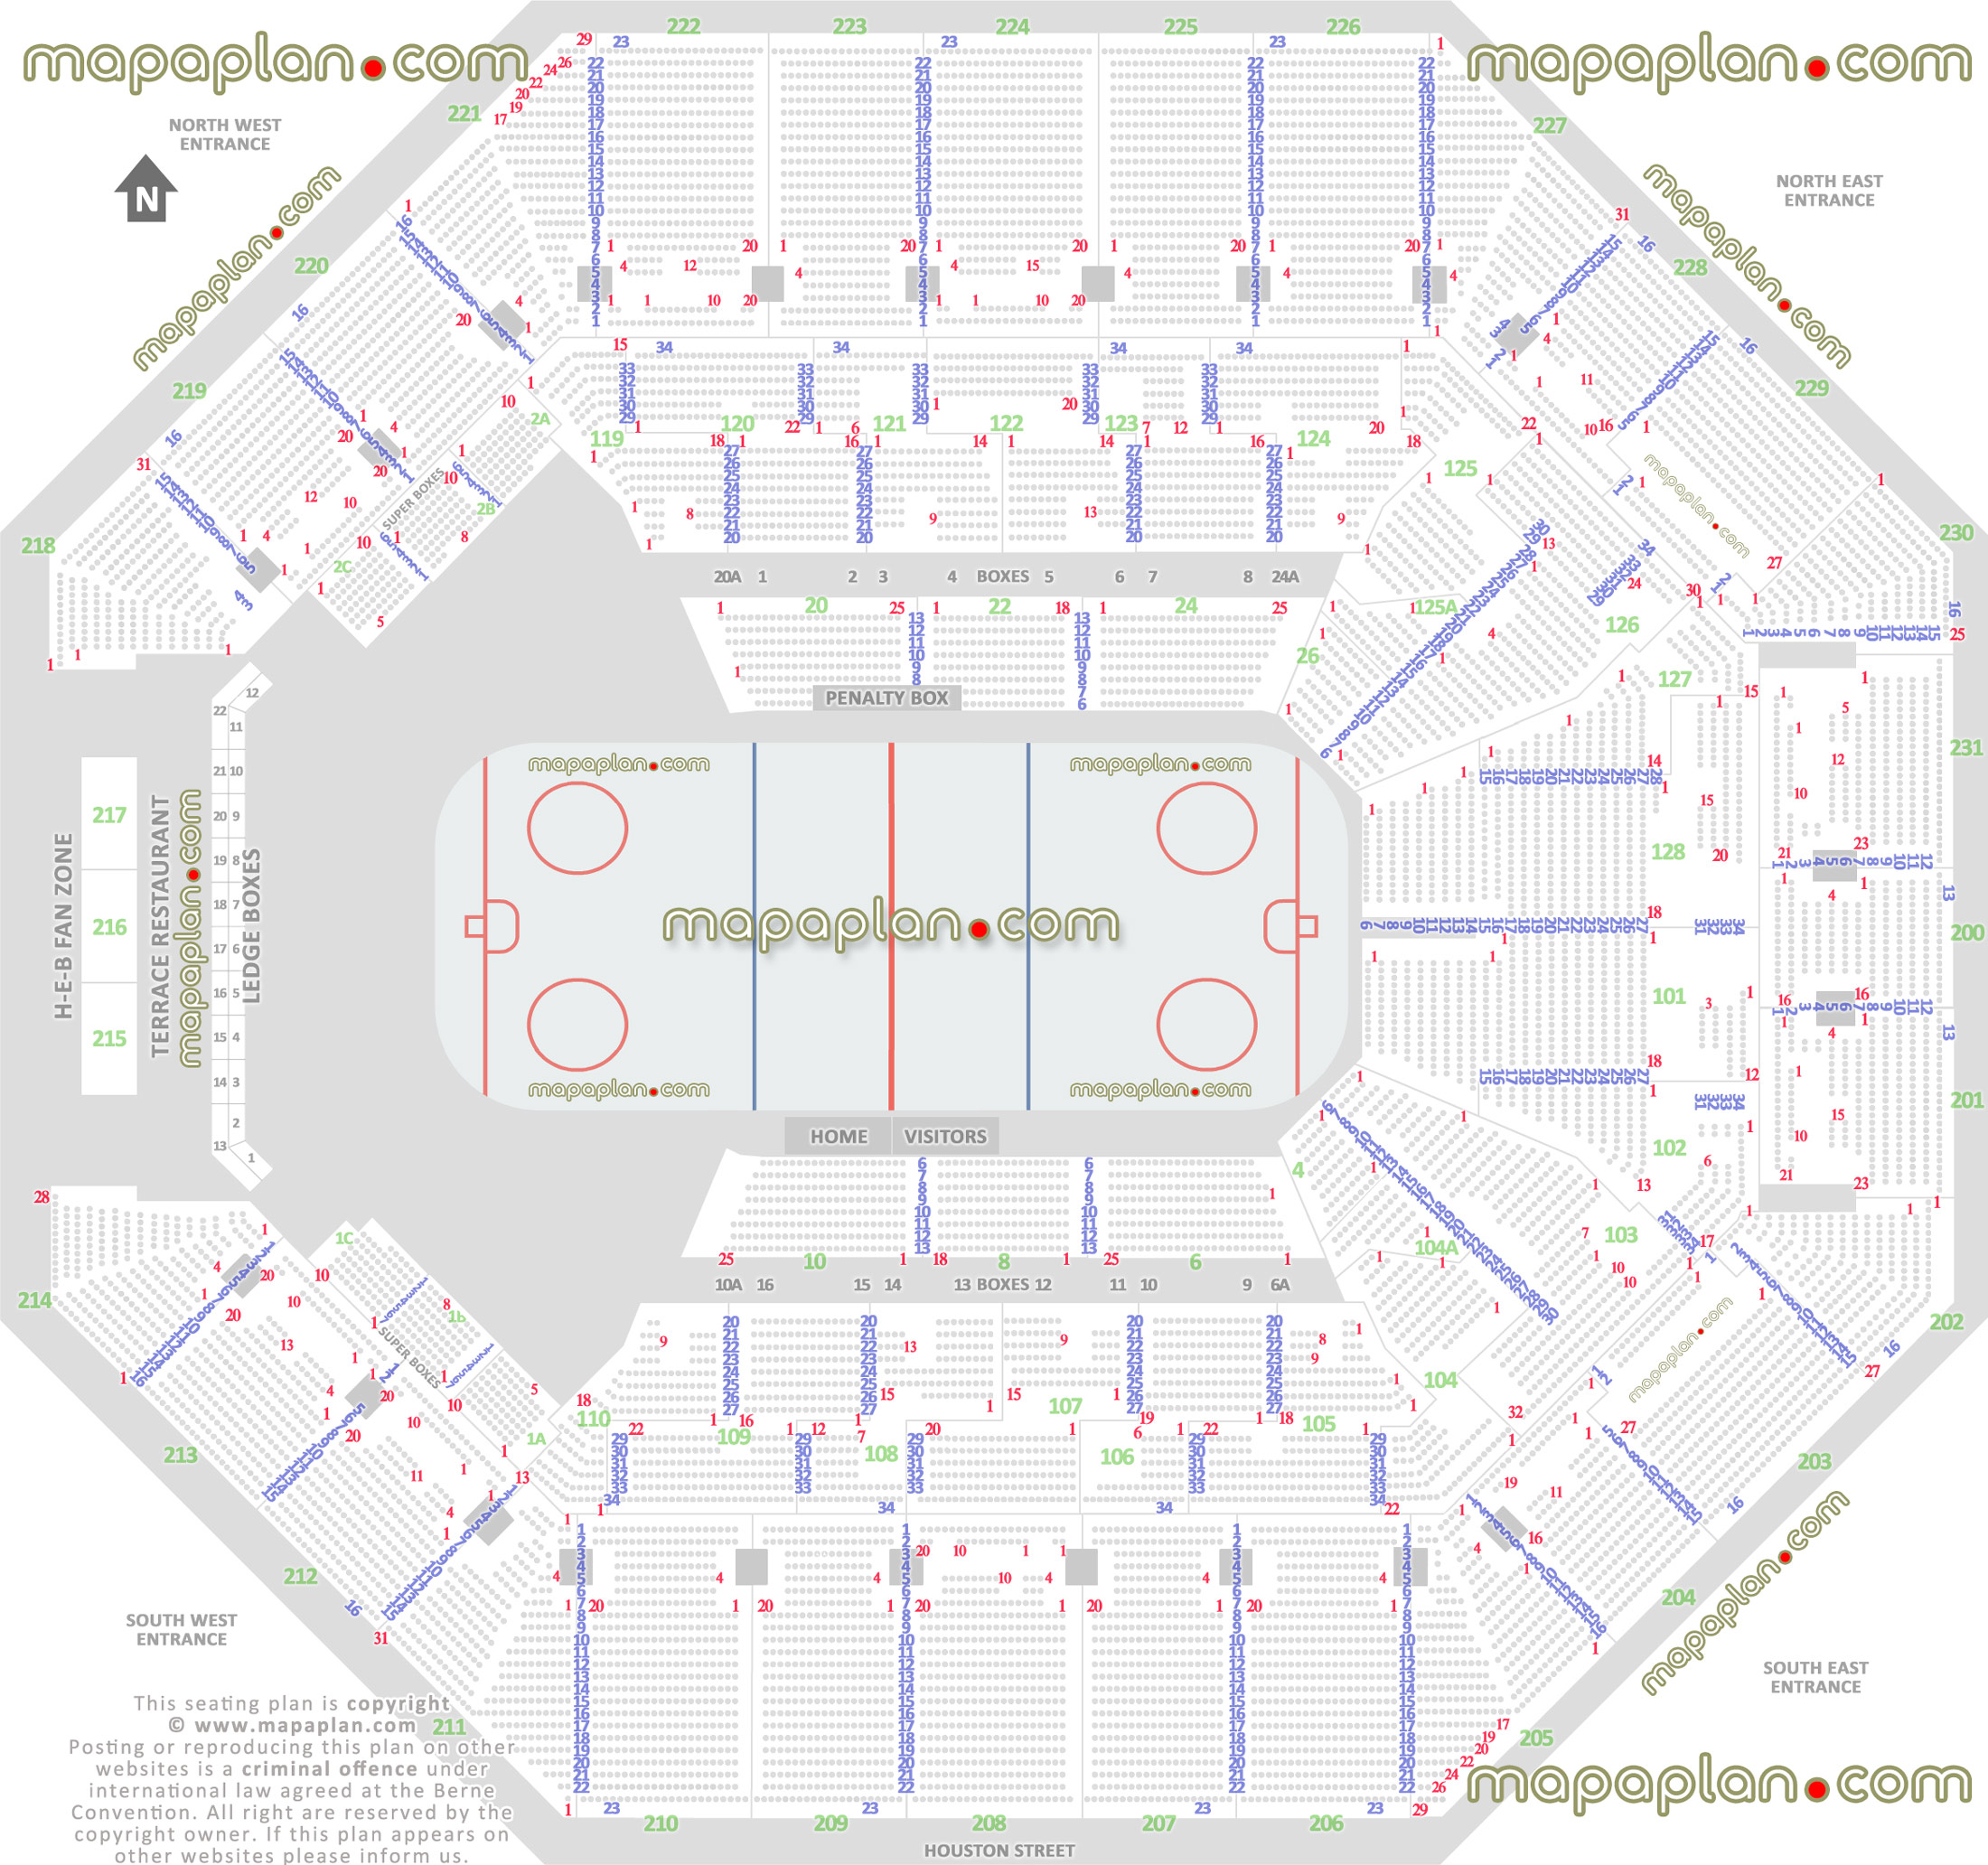 Spurs Seating Chart With Rows